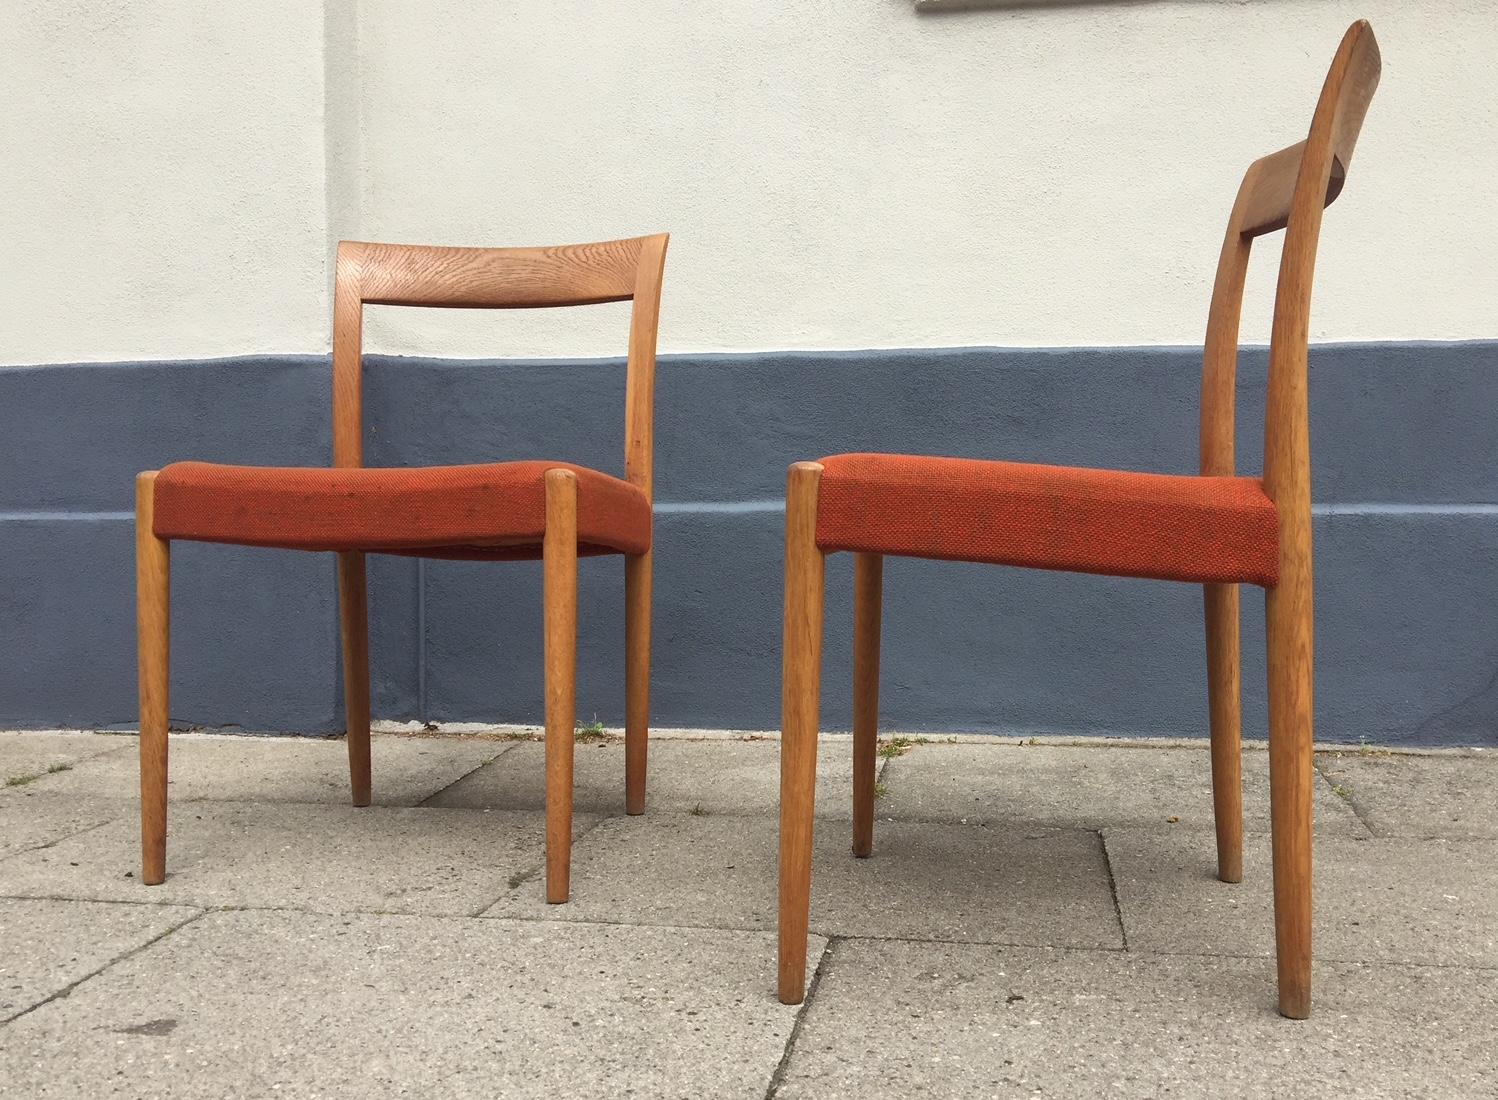 A set of two oak chairs with original orange wool upholstery. They were manufactured and designed by Søren Willadsen in Denmark in the late 1950s or early 1960s. Both of them have a brass makers mark beneath the seat. The design may have been